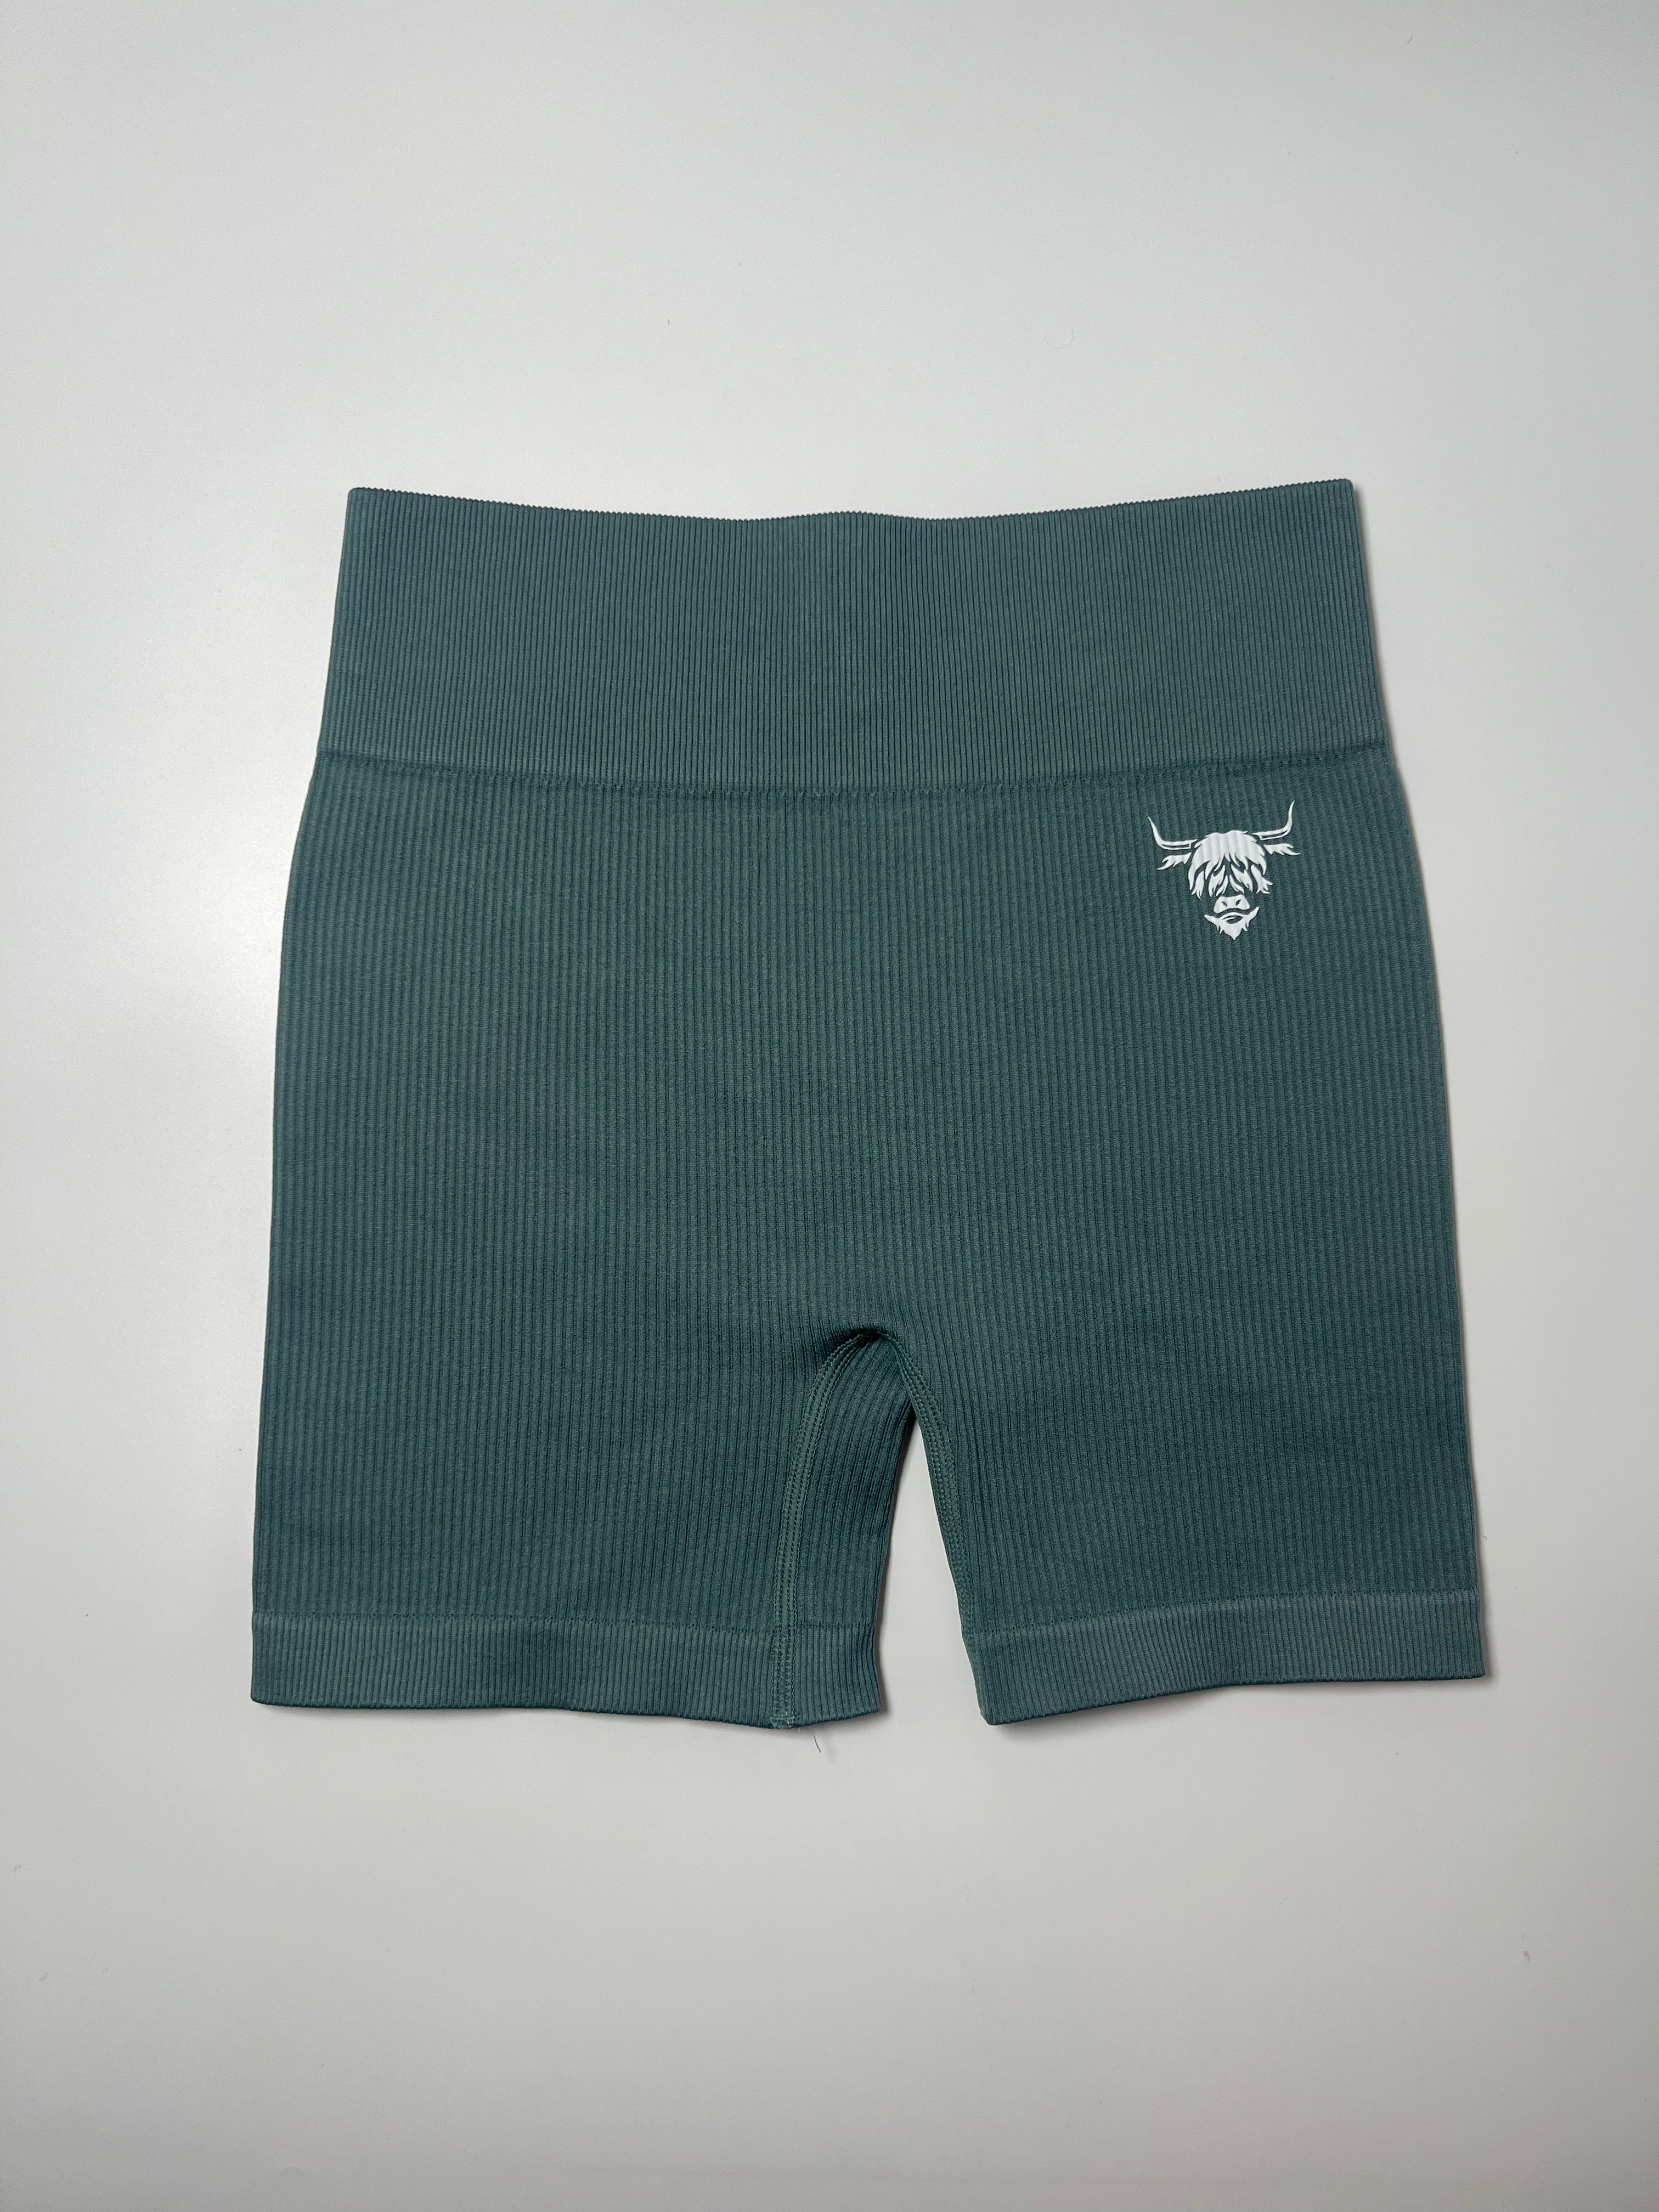 Seamless Ribbed Shorts - Dark forest green